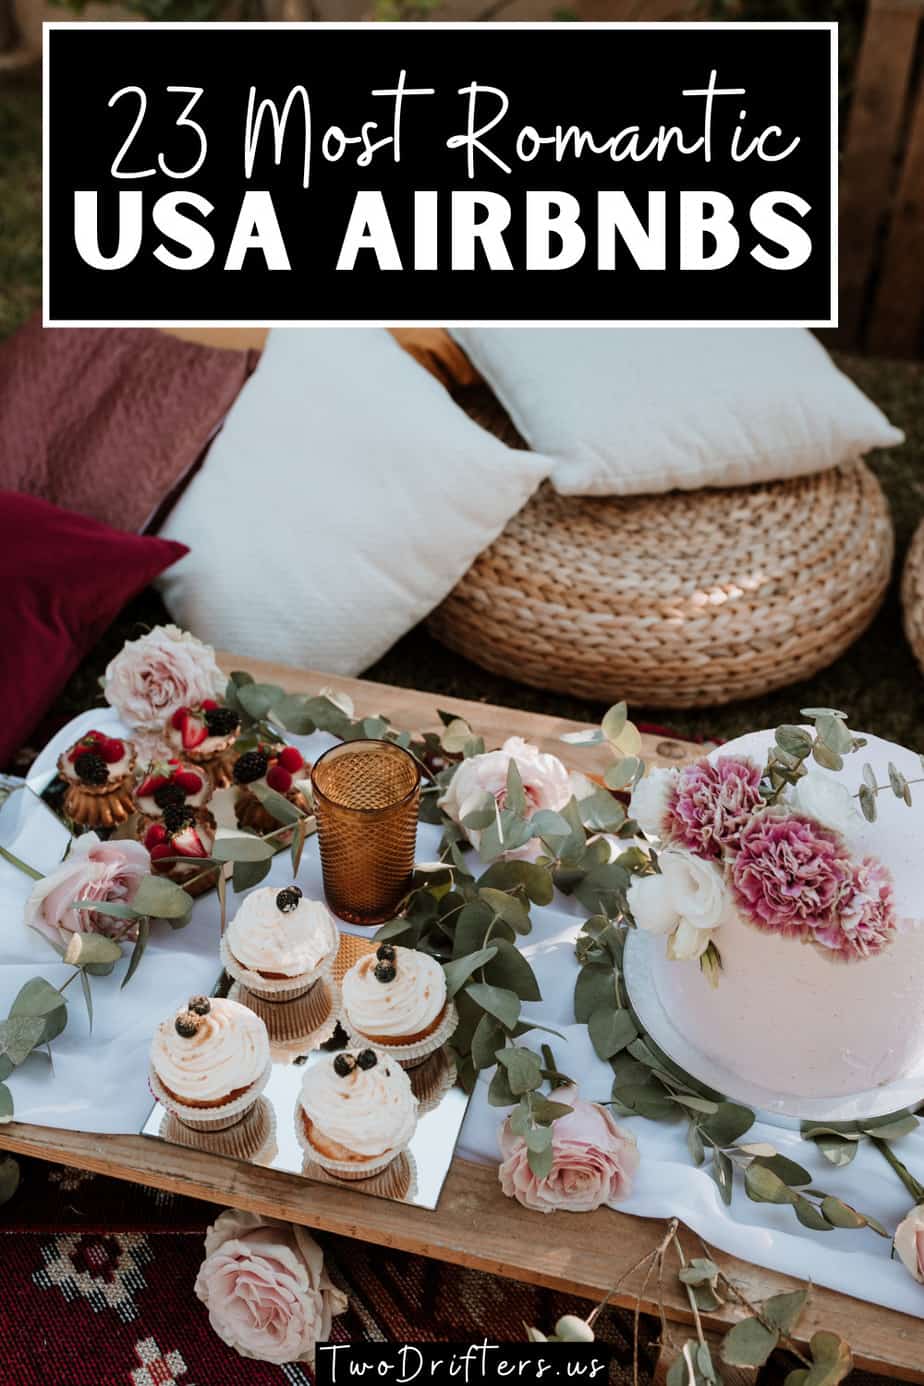 Pinterest social share image that says "23 Most Romantic USA Airbnbs."